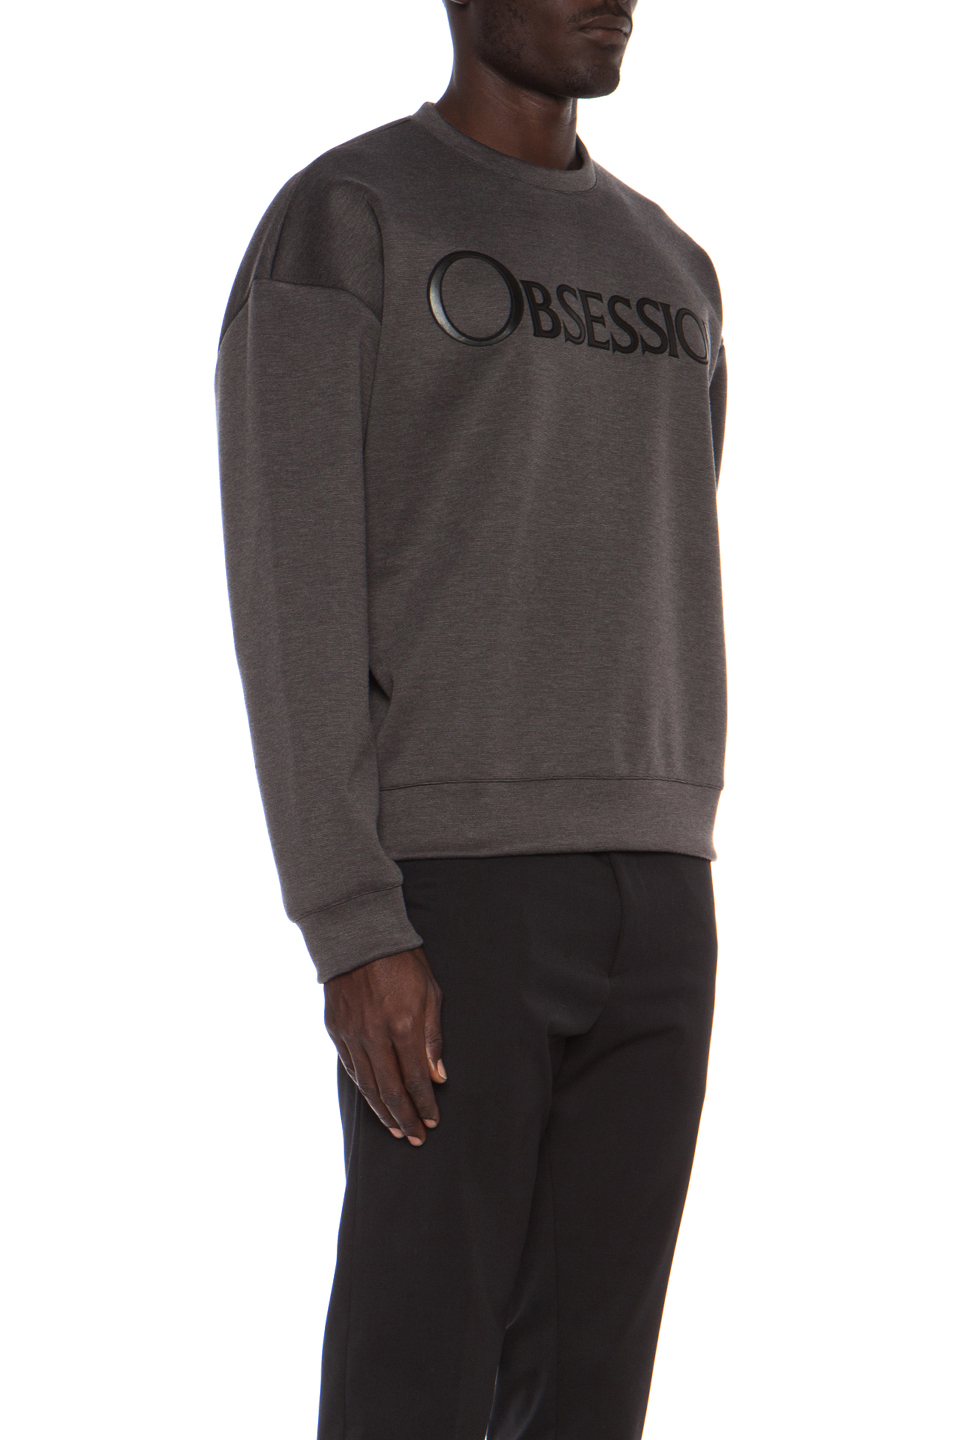 Calvin Klein Obsession Sweater Top Sellers, 51% OFF | www.slyderstavern.com